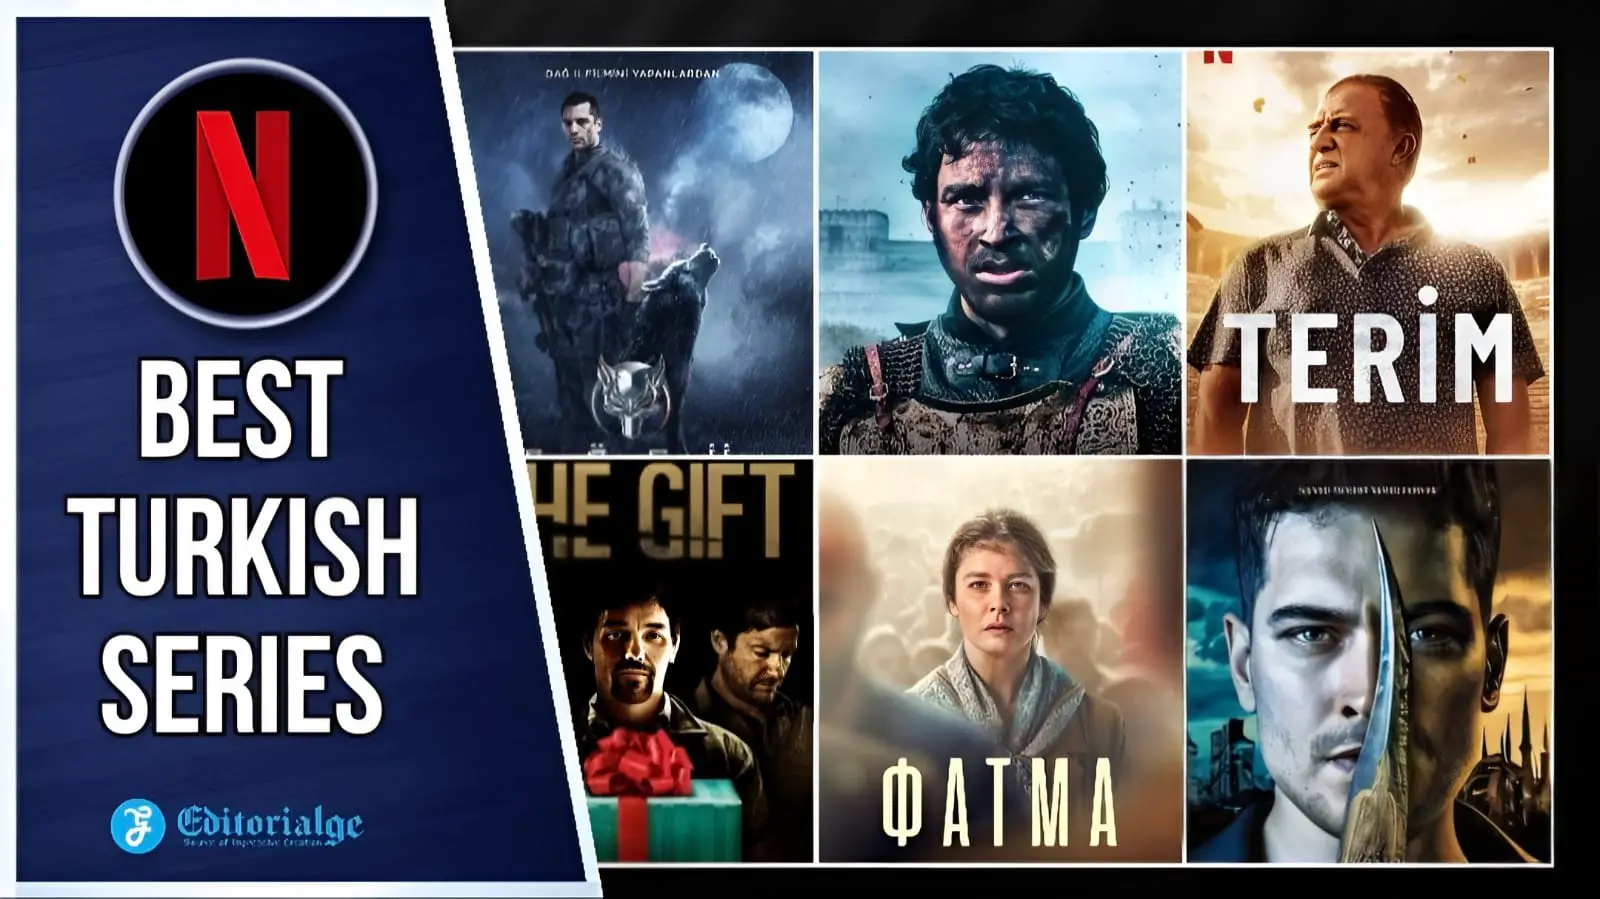 Upcoming Releases to Watch Out for on Netflix Turkey